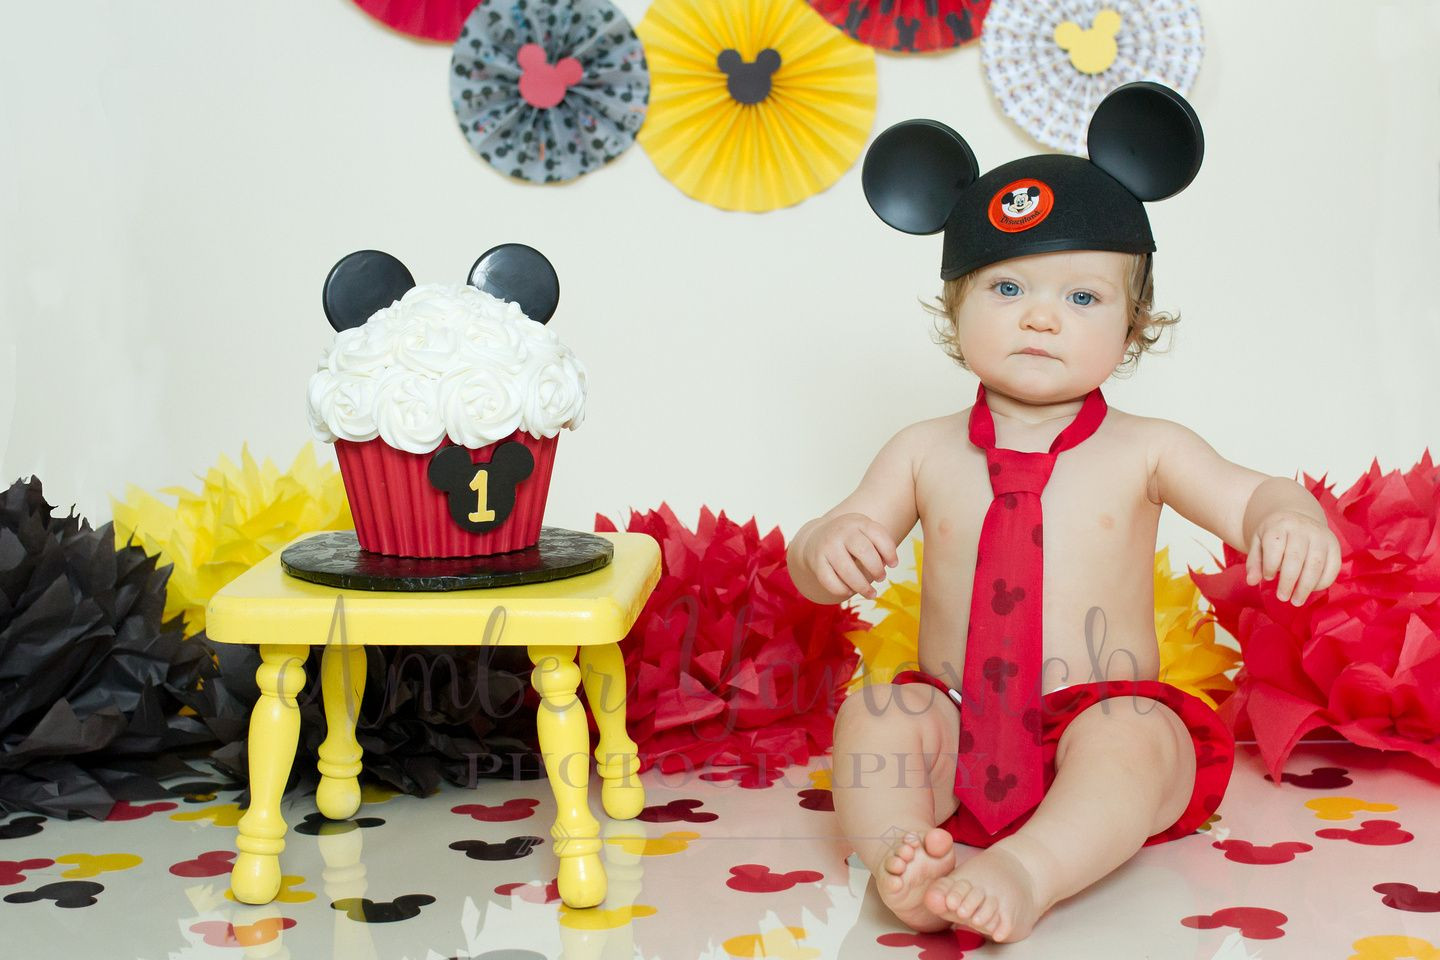 Mickey Mouse Birthday Party Ideas 1 Year Old
 e Year Old Mickey Mouse Theme Cake Smash Party Session